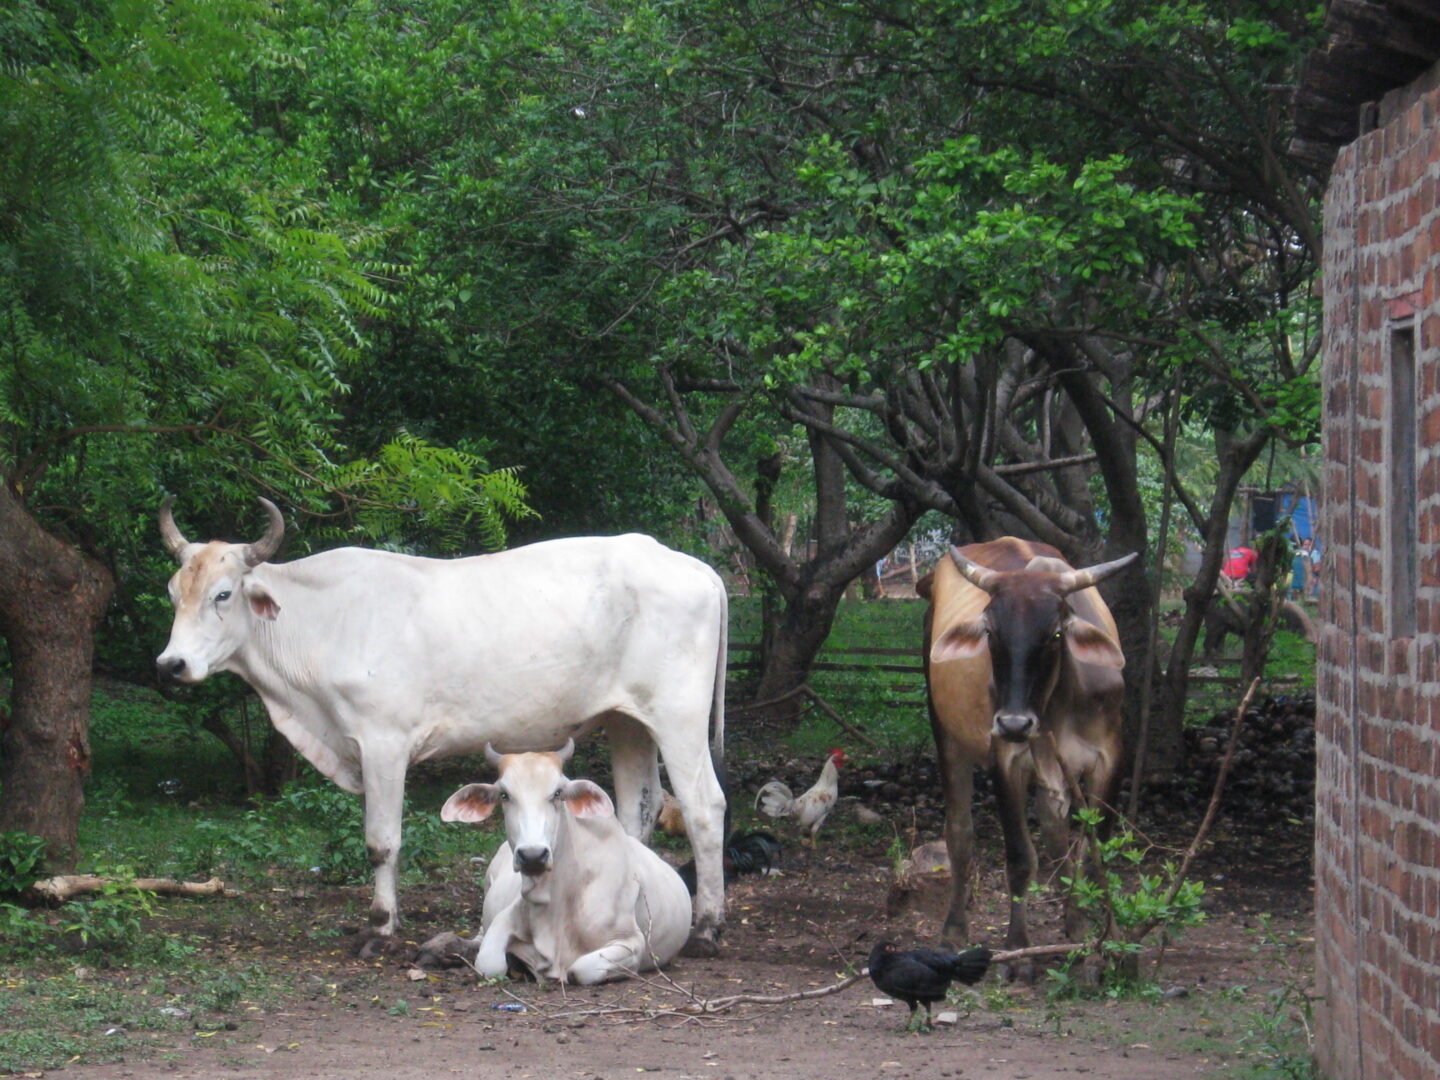 Two White Color Cows Standing Side by Side on the Road